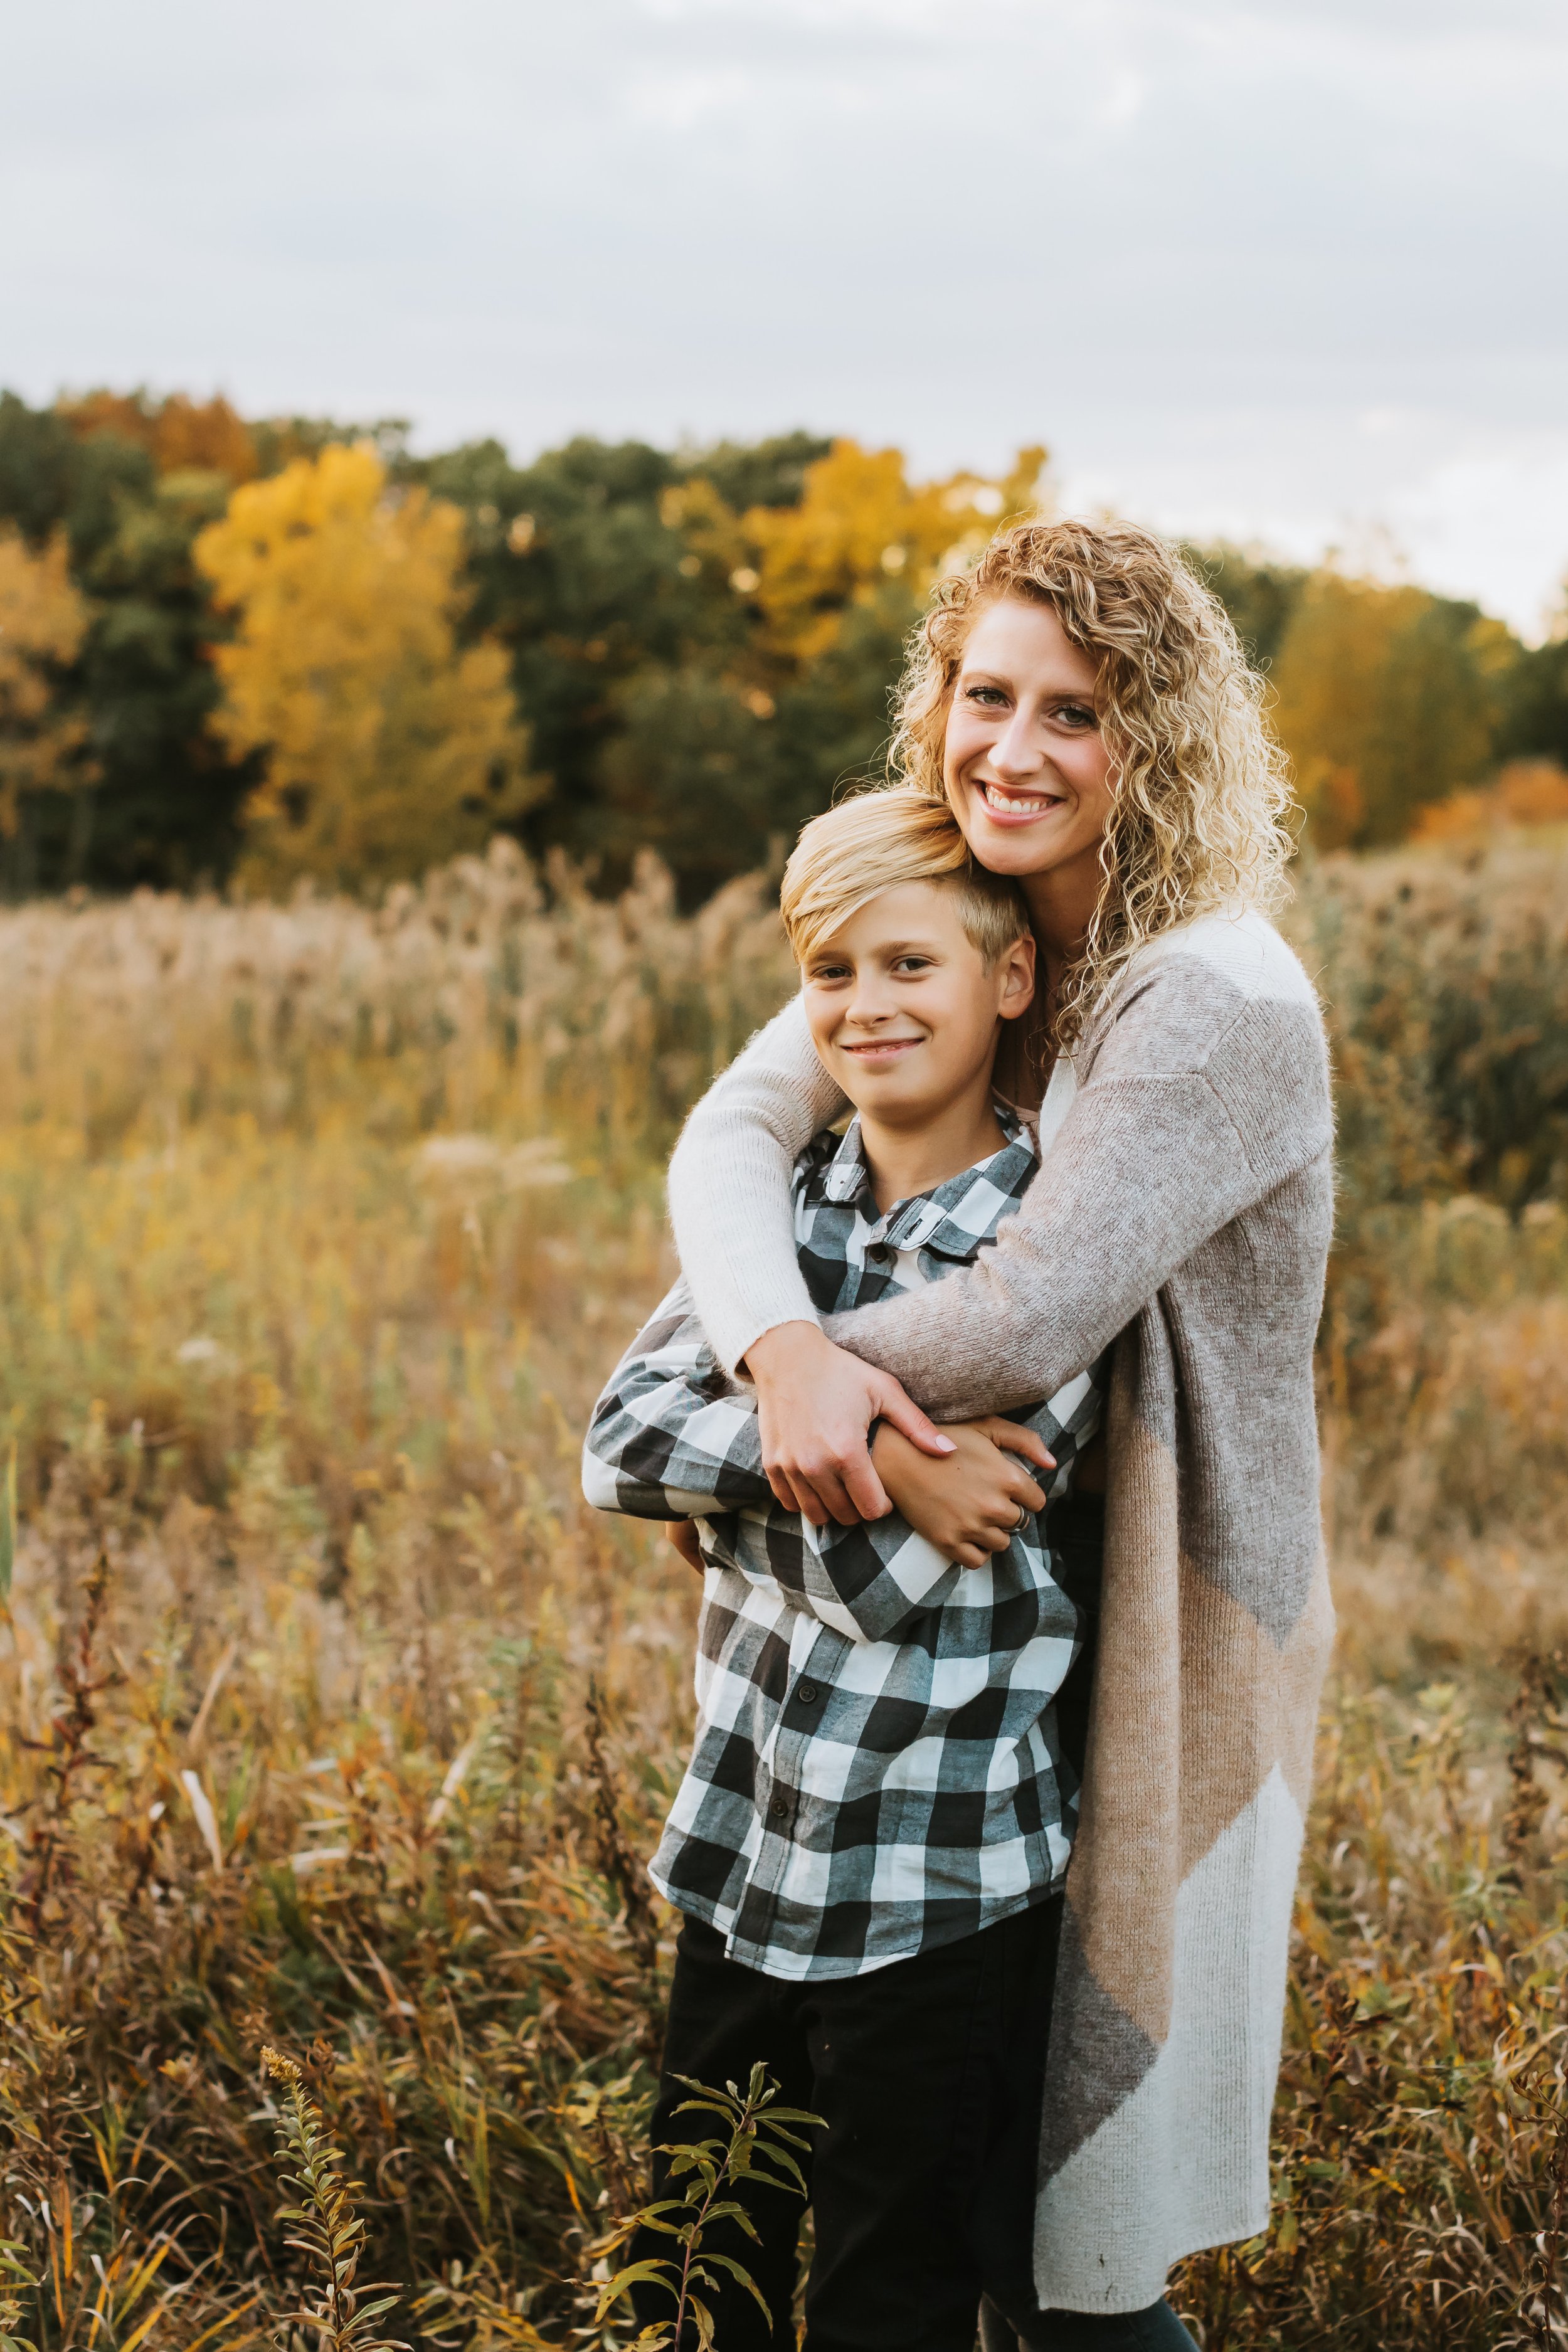  A dynamic style mother and son portrait captured by Teala Ward Photography in Illinois. mother and son poses #TealaWardPhotography #TealaWardFamilies #IllinoisValleyfamilypics #fursibiling #Illinoisfamilyphotography #brother&amp;sister 